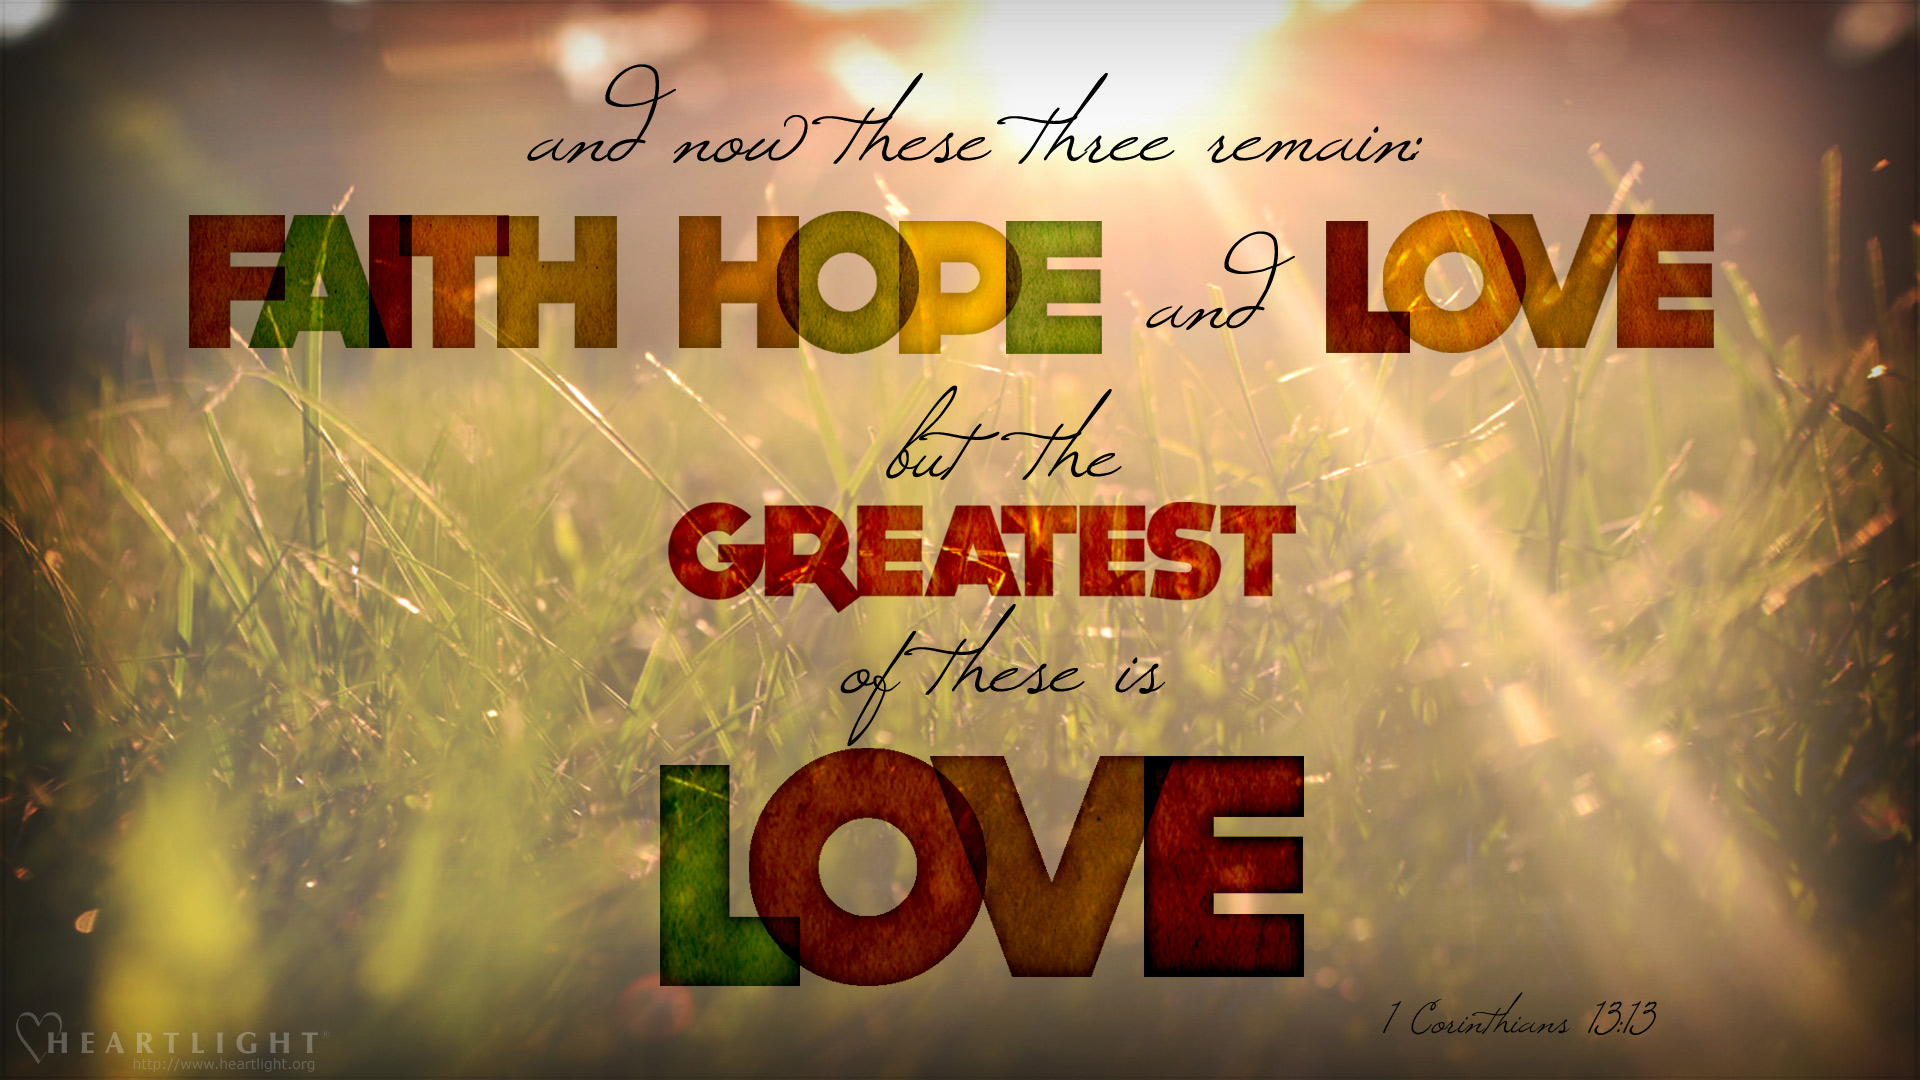 "This is the Greatest" — PowerPoint Background of 1 Corinthians 13:13